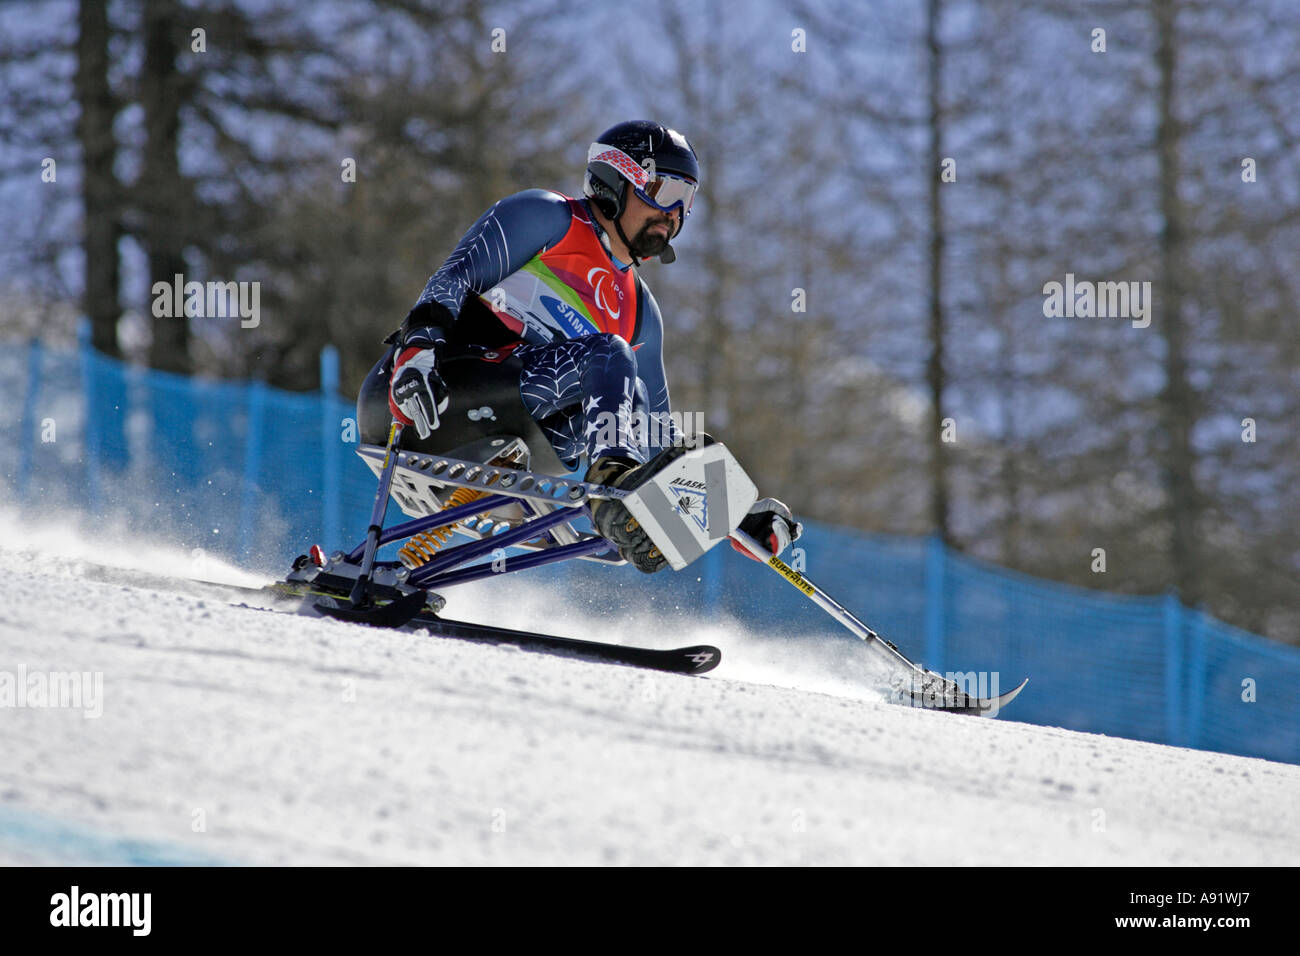 Joseph Tompkins LW11 of the USA in the Mens Alpine Skiing Super G Sitting competition Stock Photo